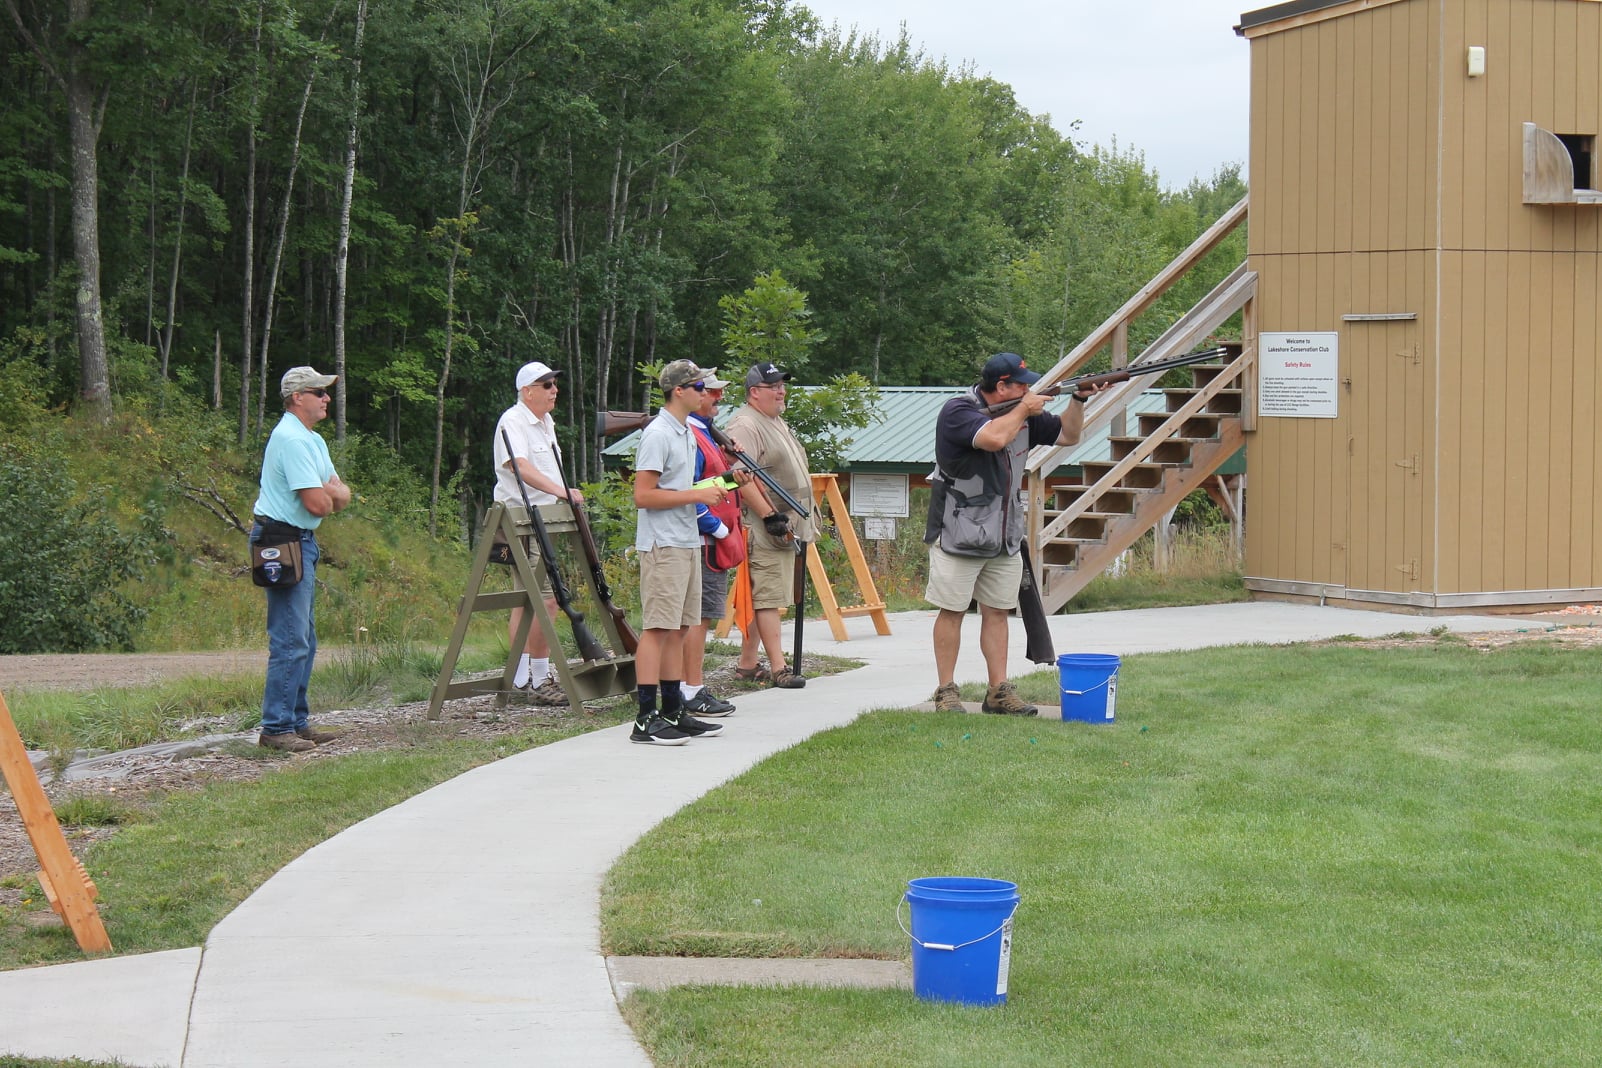 League at Lakes Area Shooting Sports